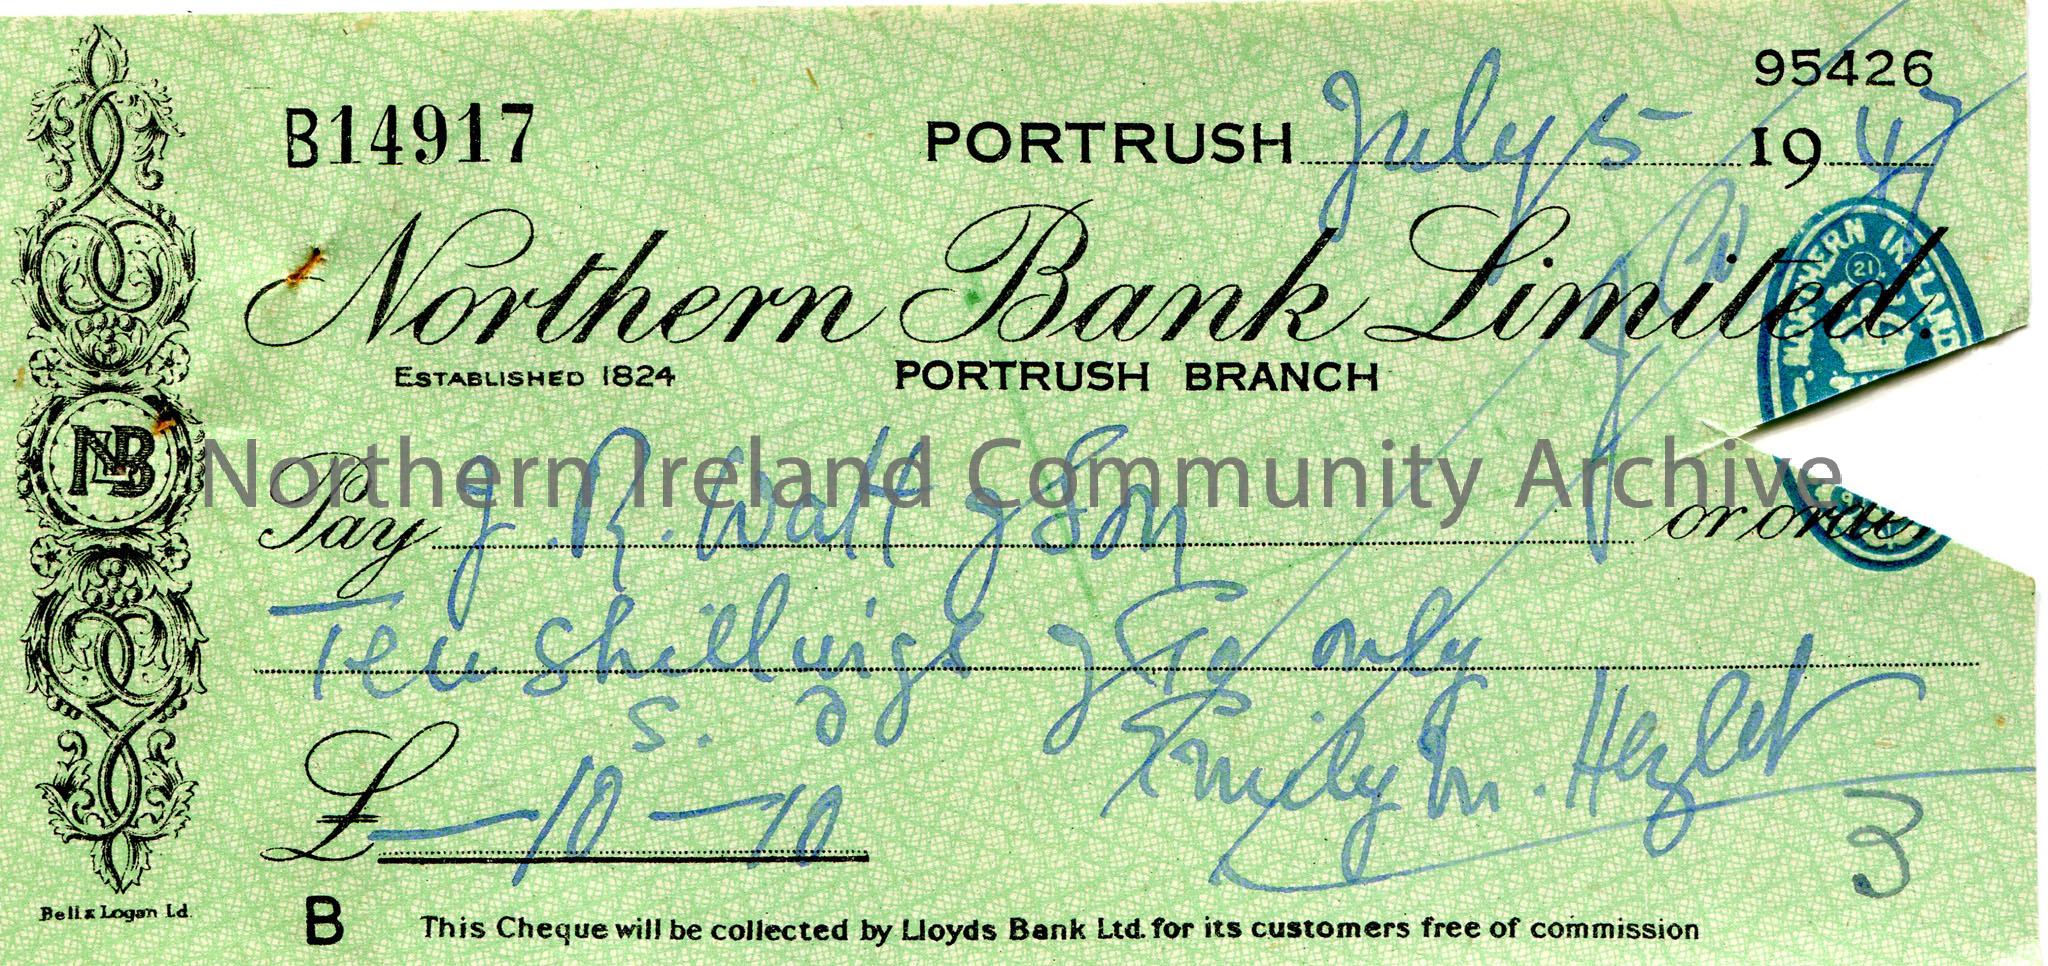 Handwritten Northern Bank Limited, Portrush branch cheque, no B14917. Payable to J. R. Watt & Son from Emily M. Hezlet for £0.10.10. Dated 5th Ju…